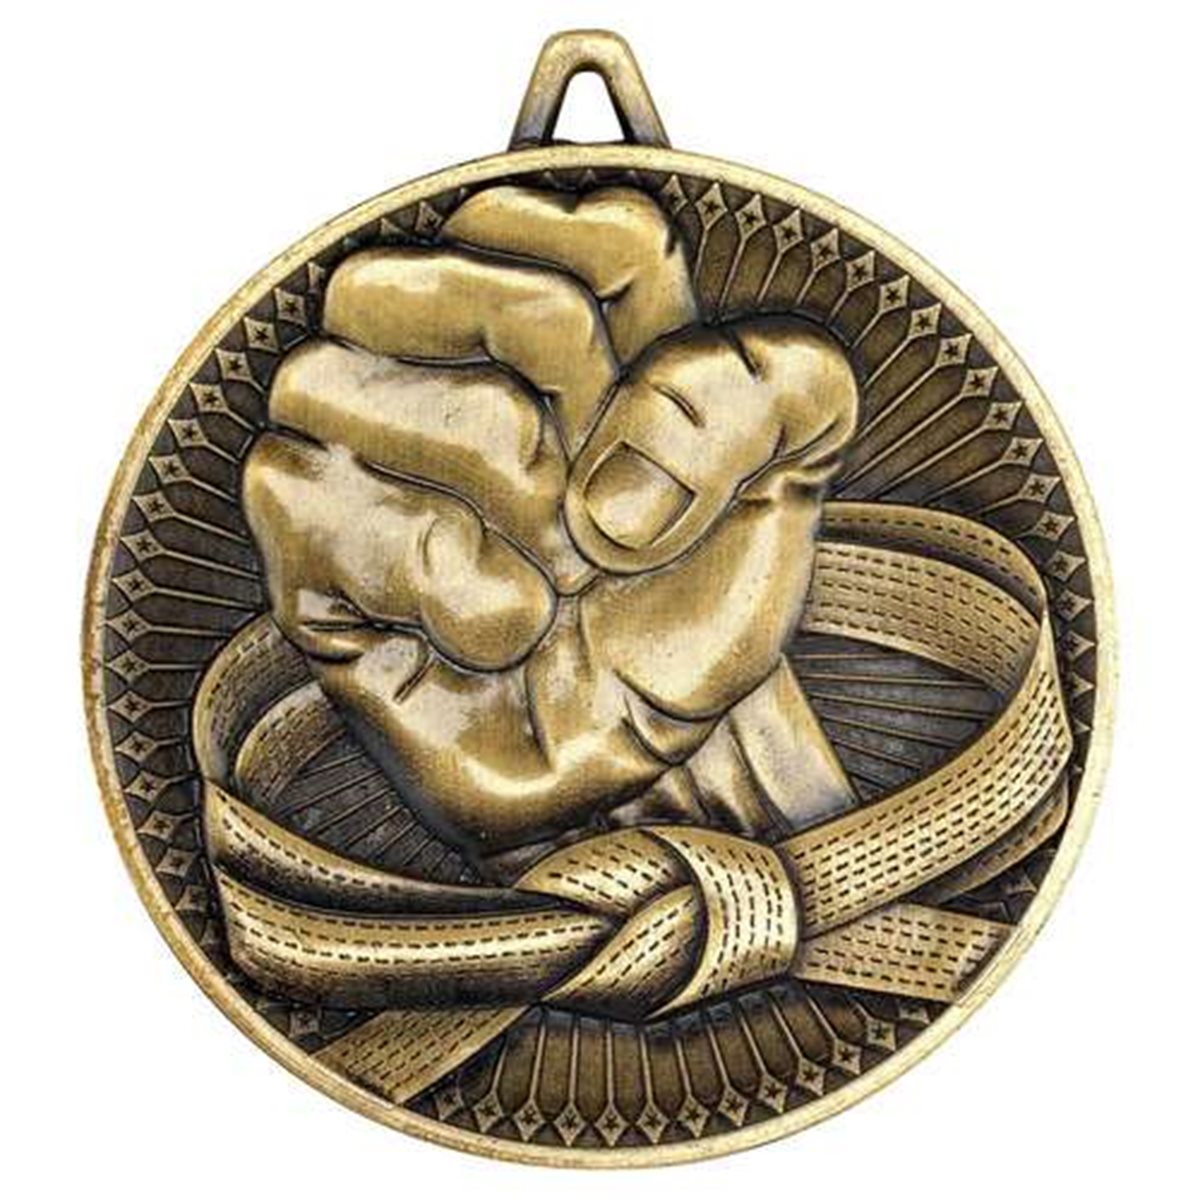 60mm Deluxe Martial Arts Medal DM07 in Gold, Silver & Bronze